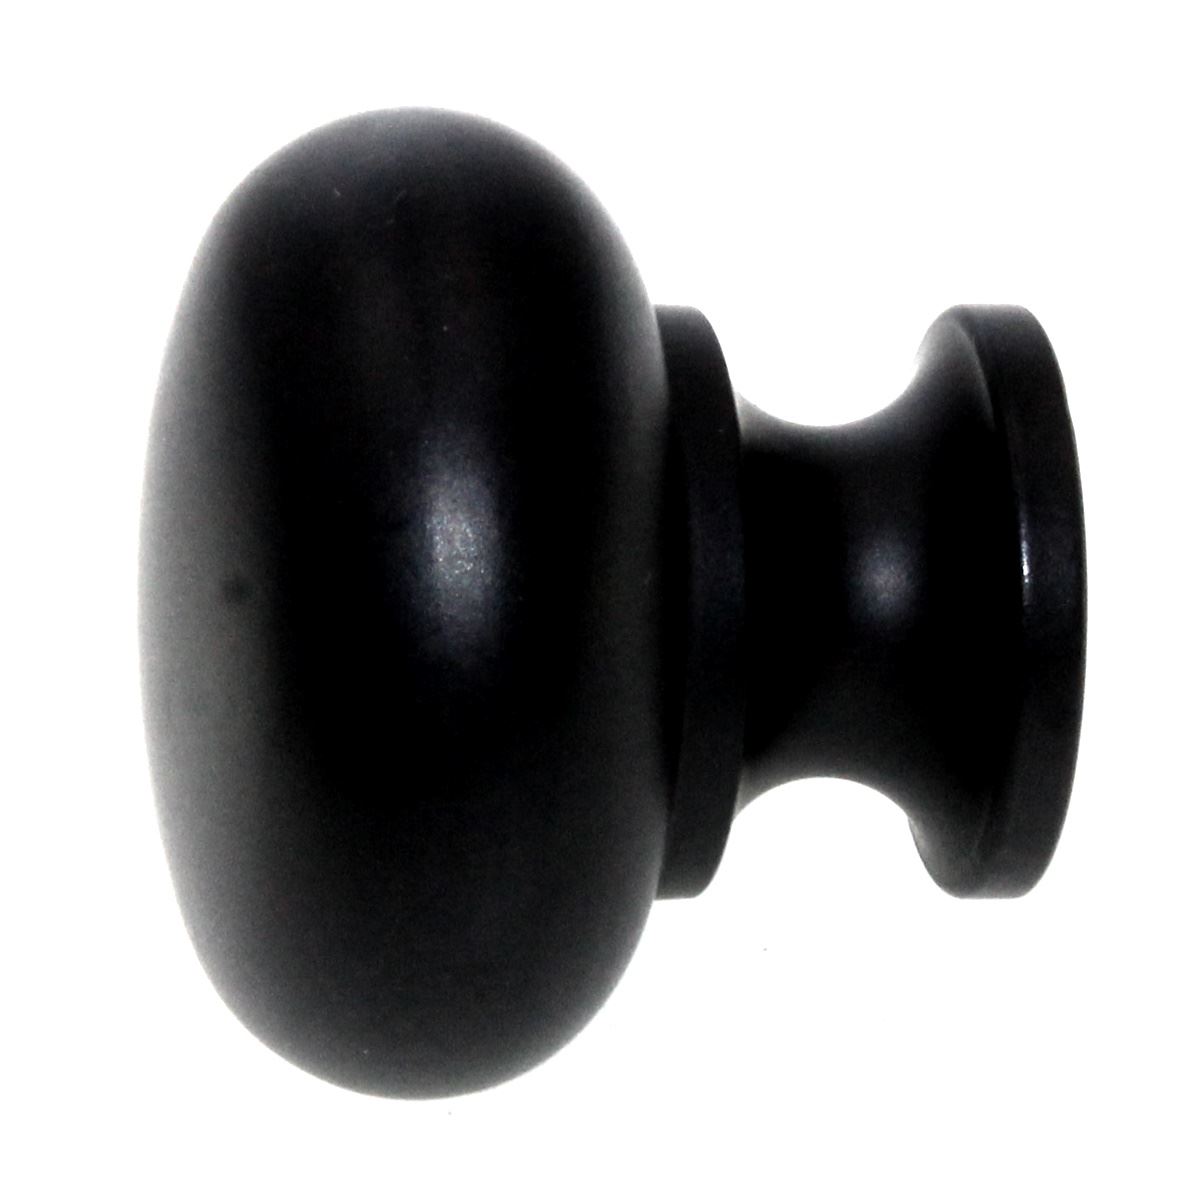 Schaub And Company Country 1 1/4" Solid Brass Cabinet Knob Flat Black 706-FB